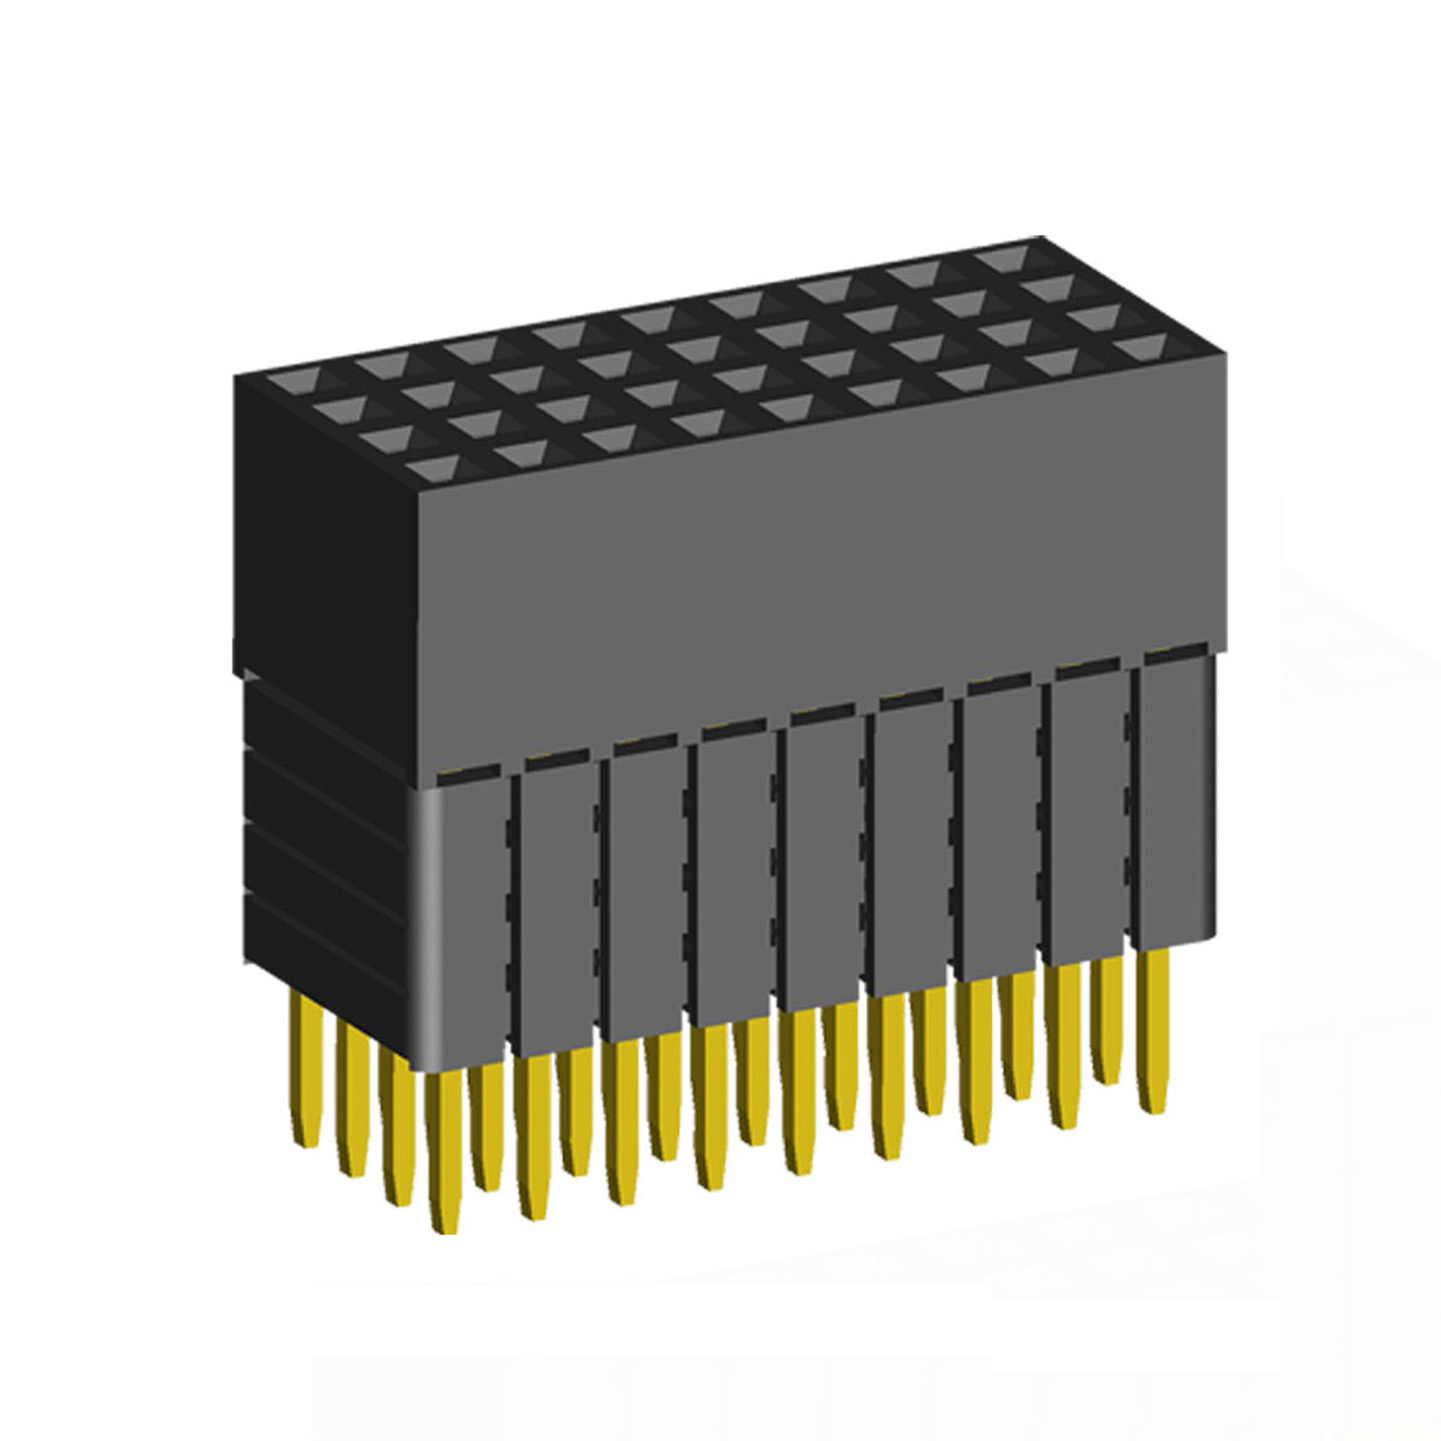 1999SDI-XXXG-4B series, four-row sockets straight to the Board for mounting holes, pitch 2,0x2,0 mm, 4x40 pins